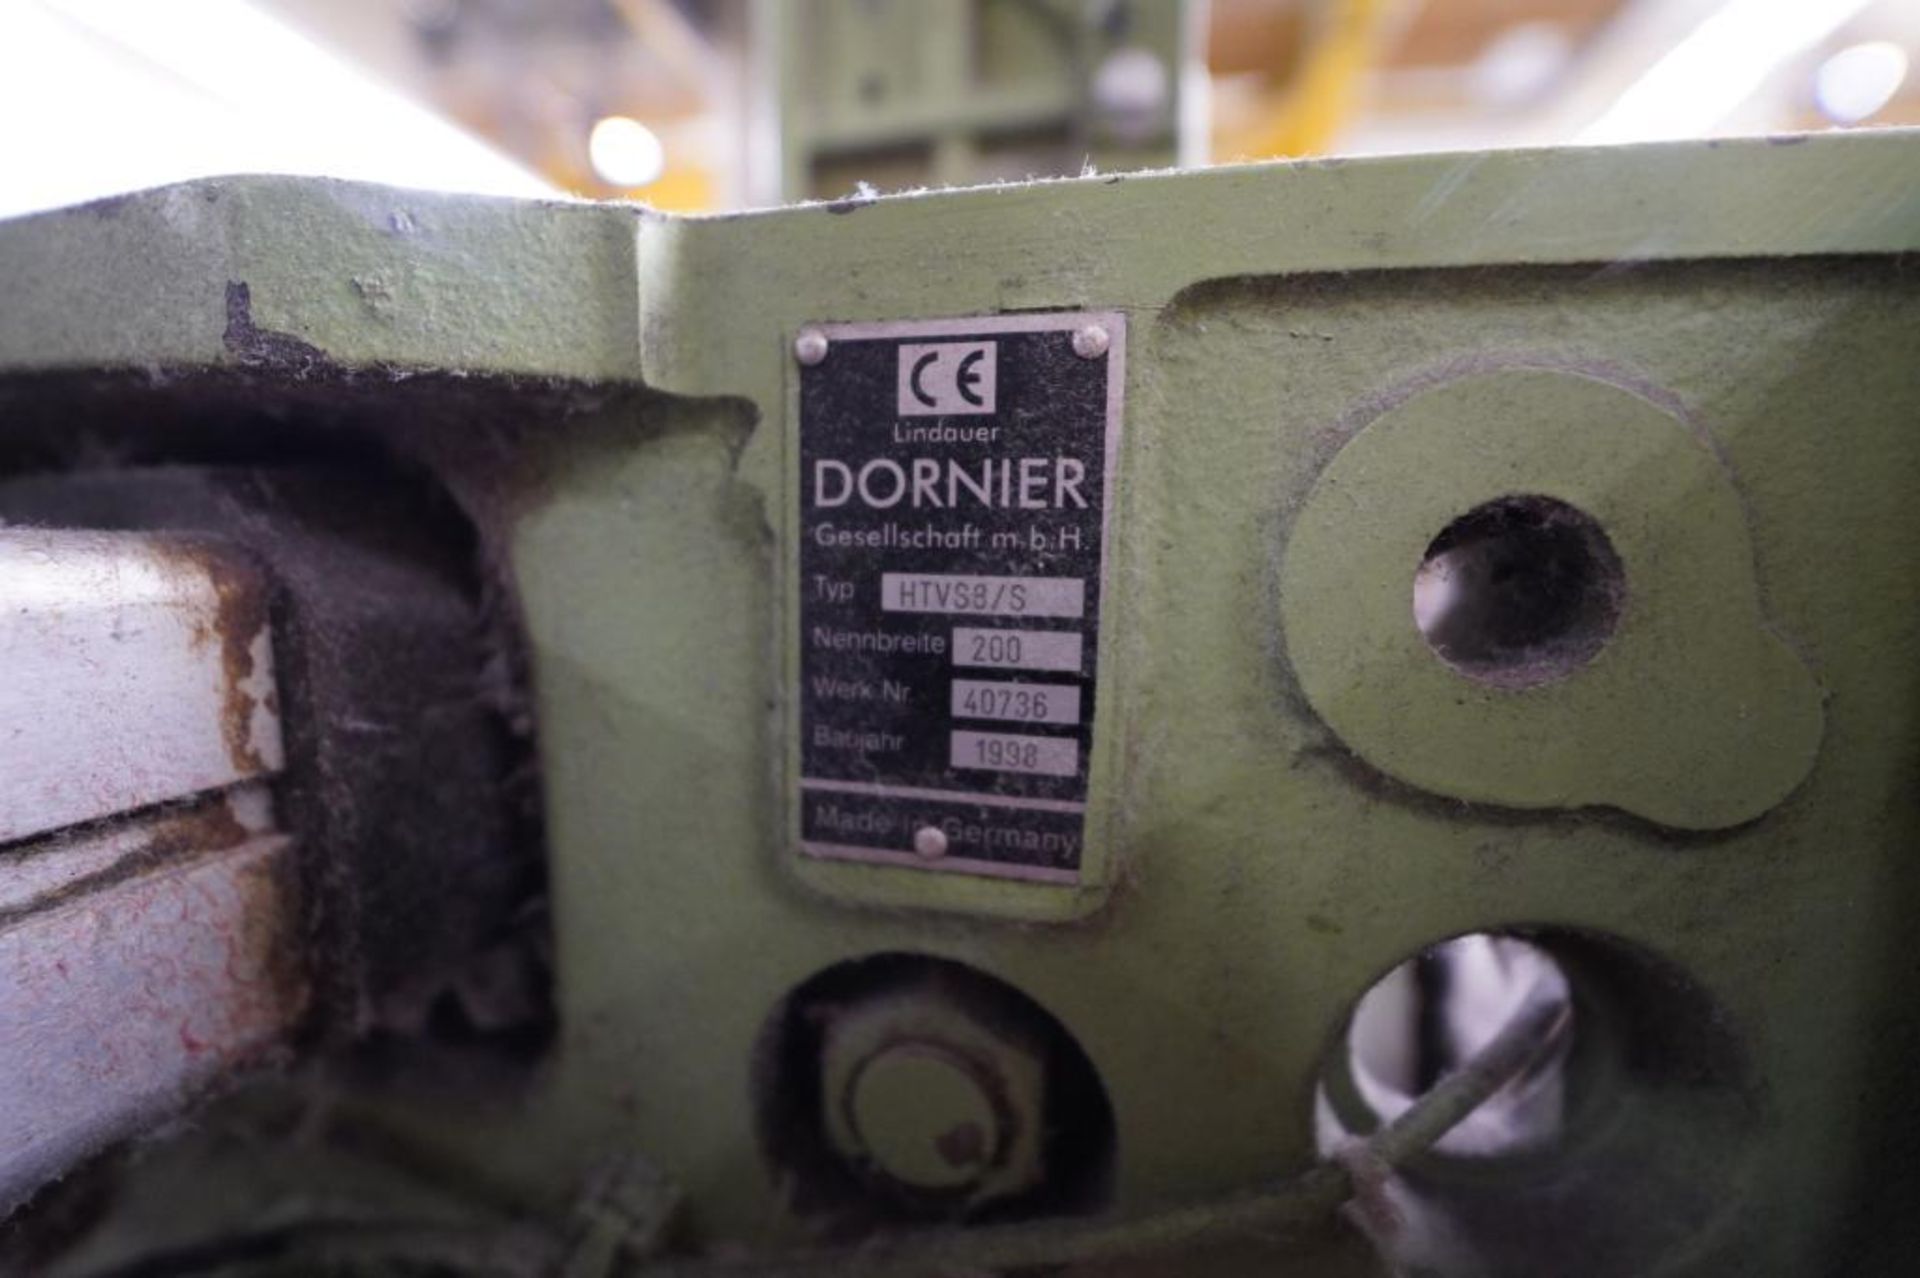 1998 Dornier 200 cm Jacquard Rapier Loom, Model HTVS 8/S, S/N 40736 - Equiped with 6 ECS, Located At - Image 11 of 11